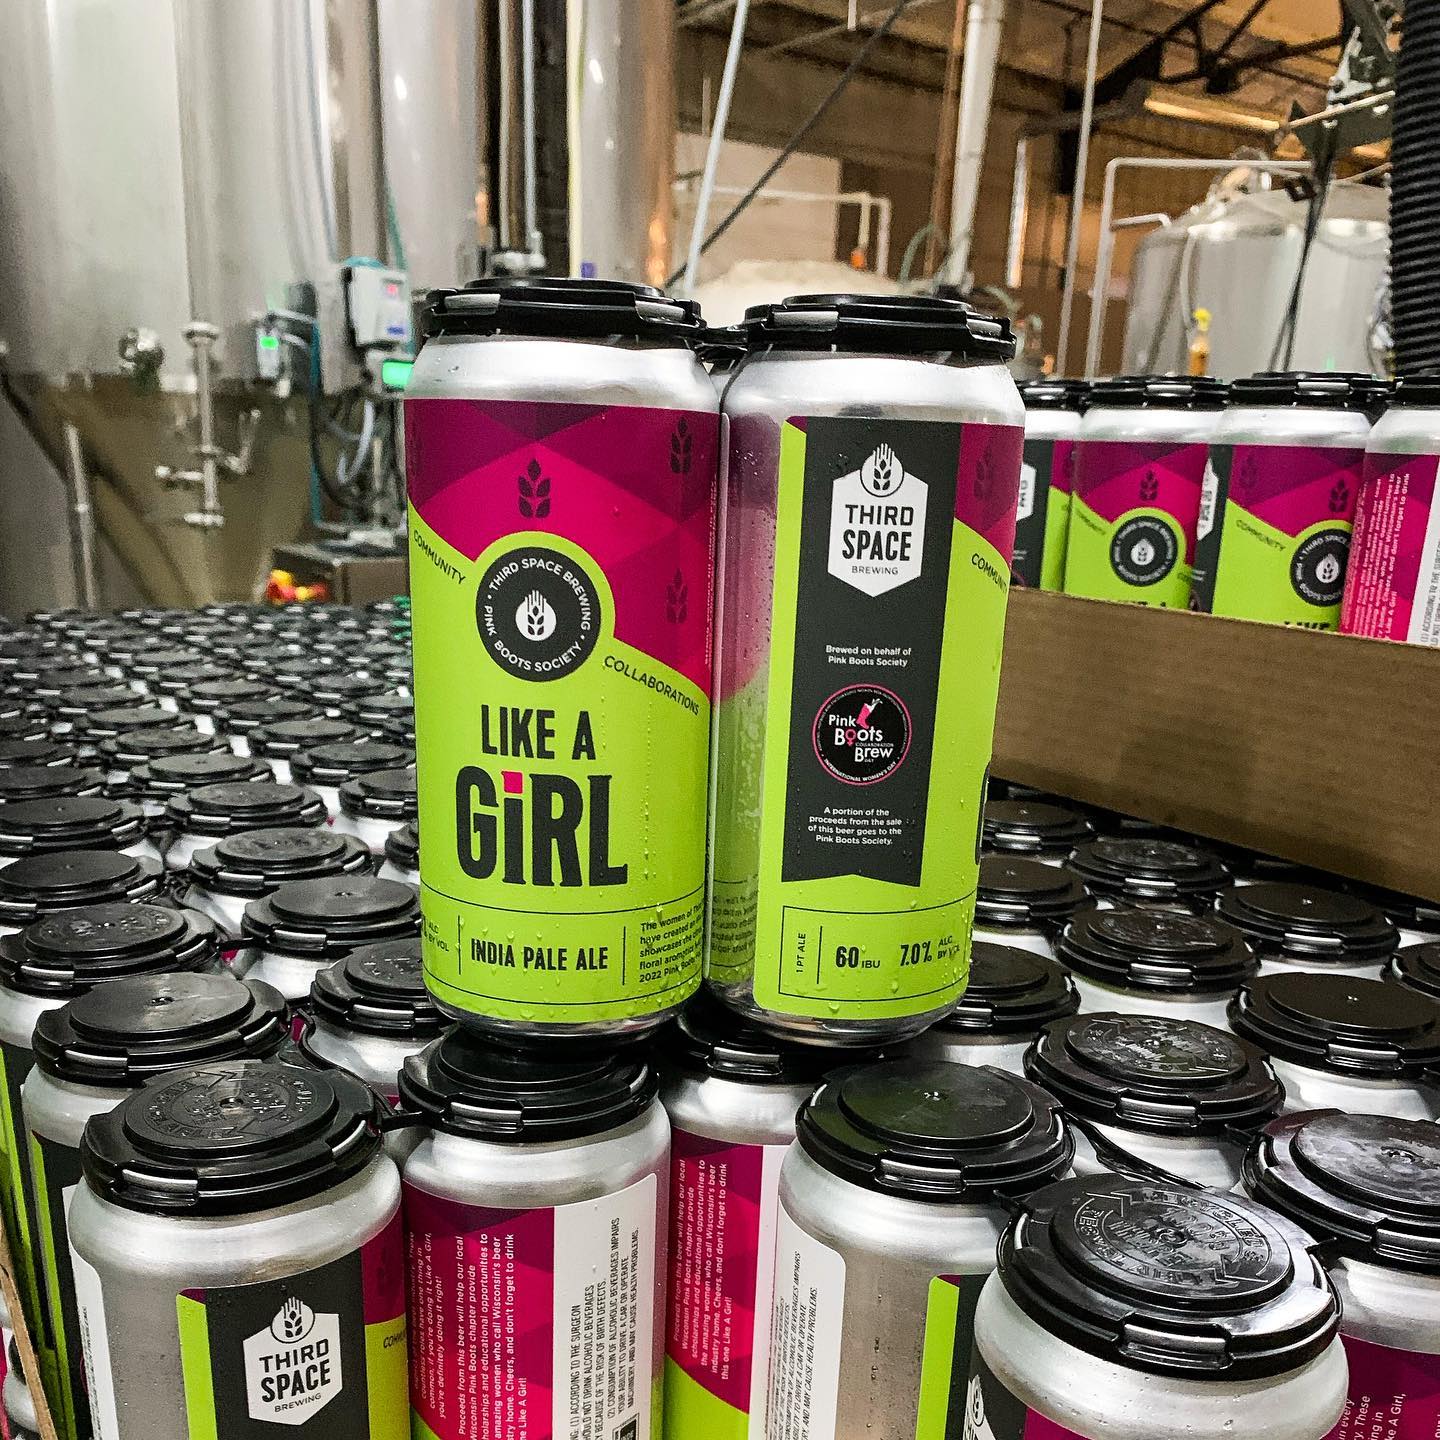 A stack of freshly-canned Like A Girl IPA at Third Space Brewing